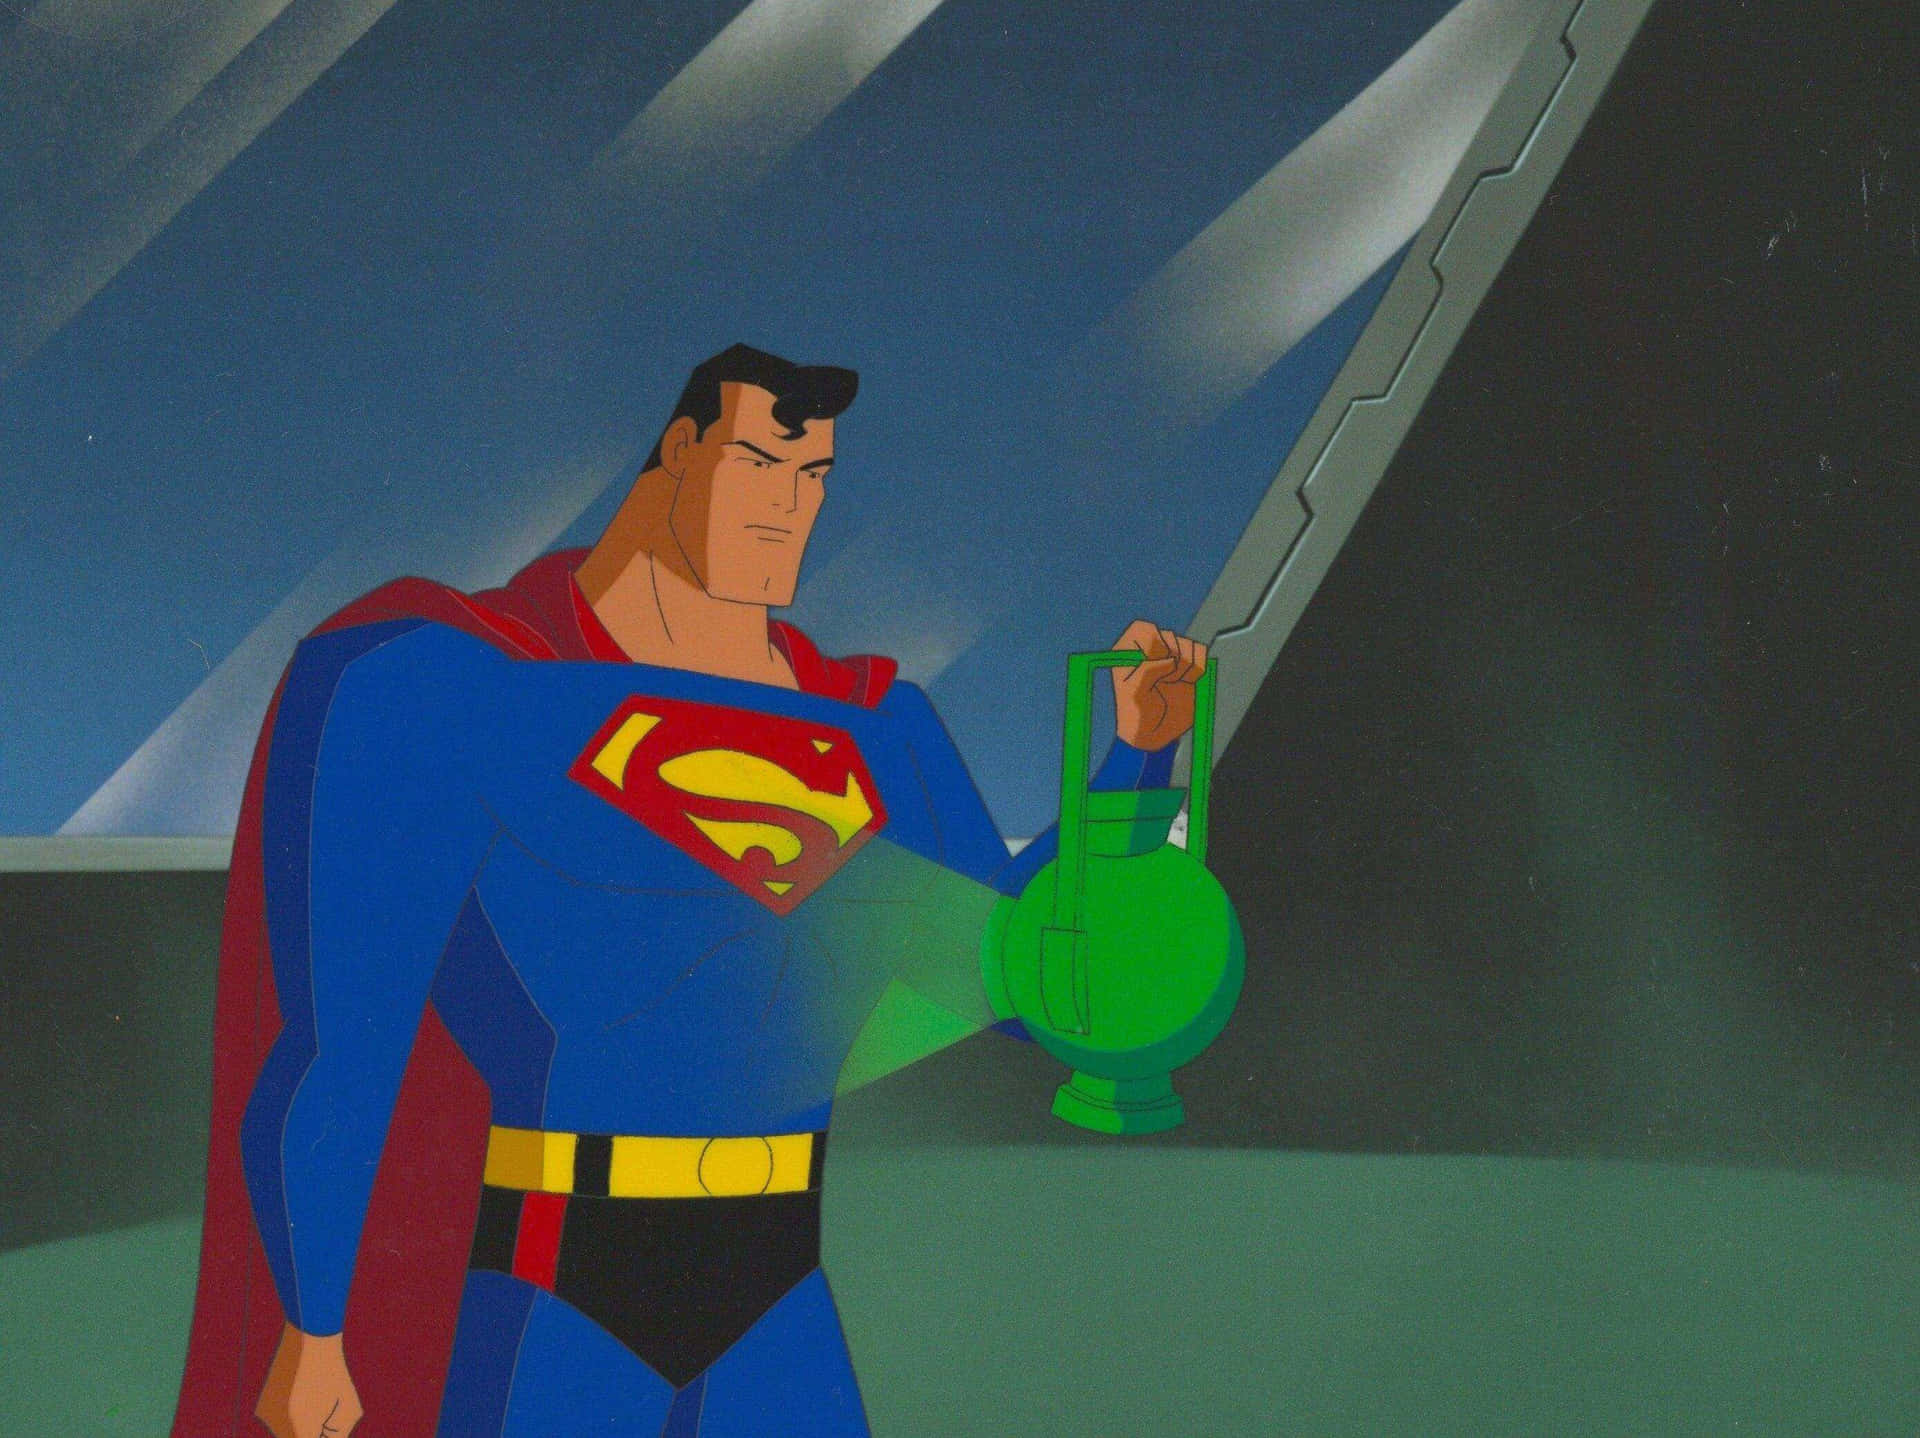 Superman soars high in Metropolis from Superman: The Animated Series Wallpaper